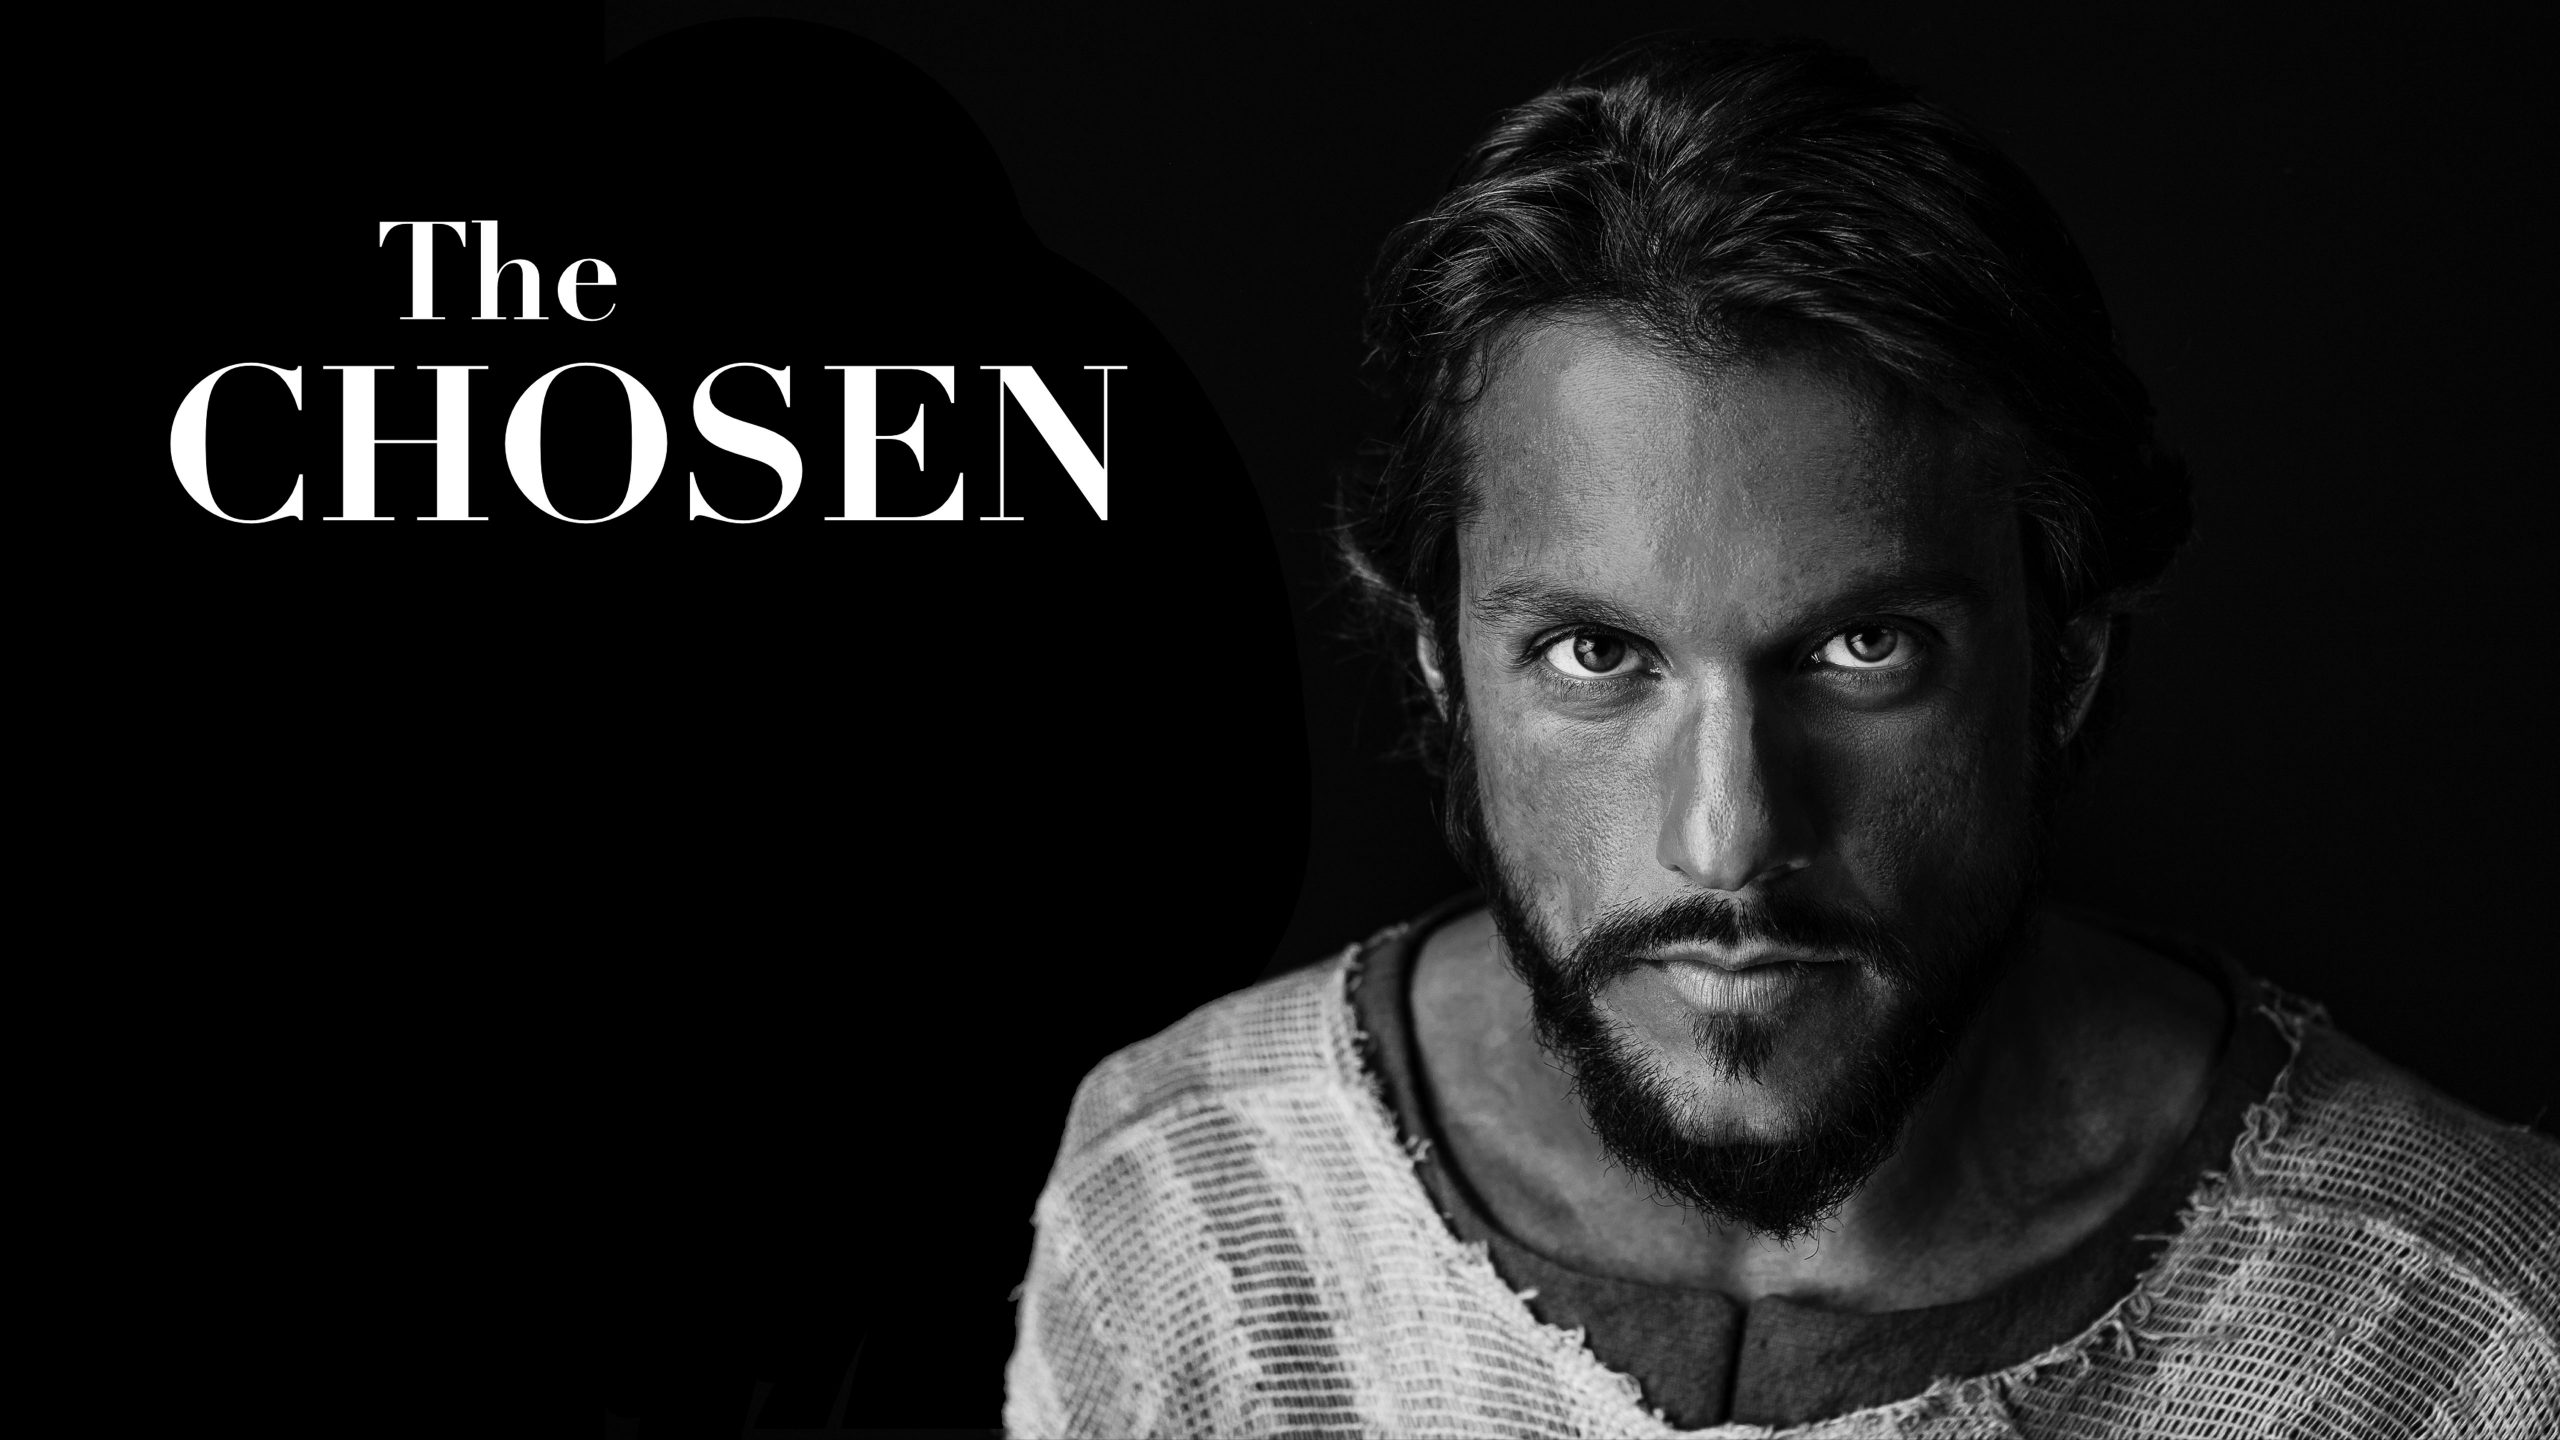 Faith-based TV series 'The Chosen' tells the story of Jesus: The